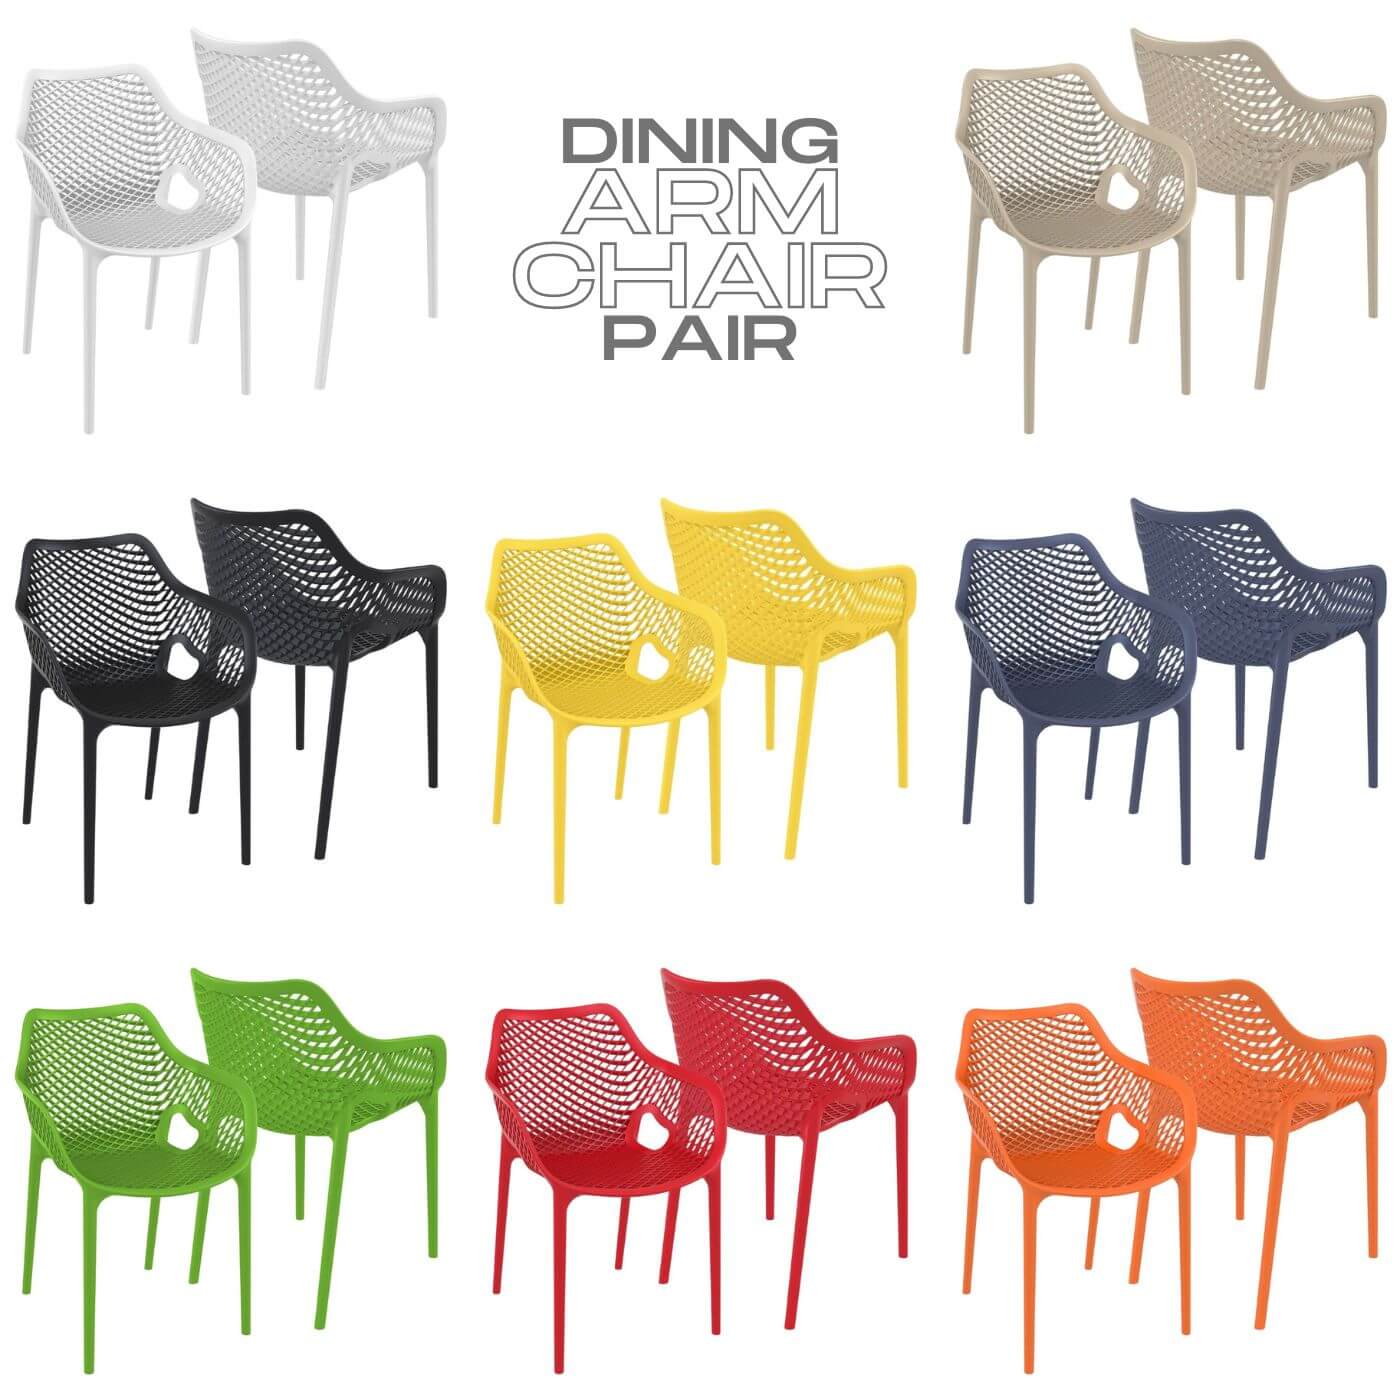 breeze-dininig-arm-chair-colors outdoor uv